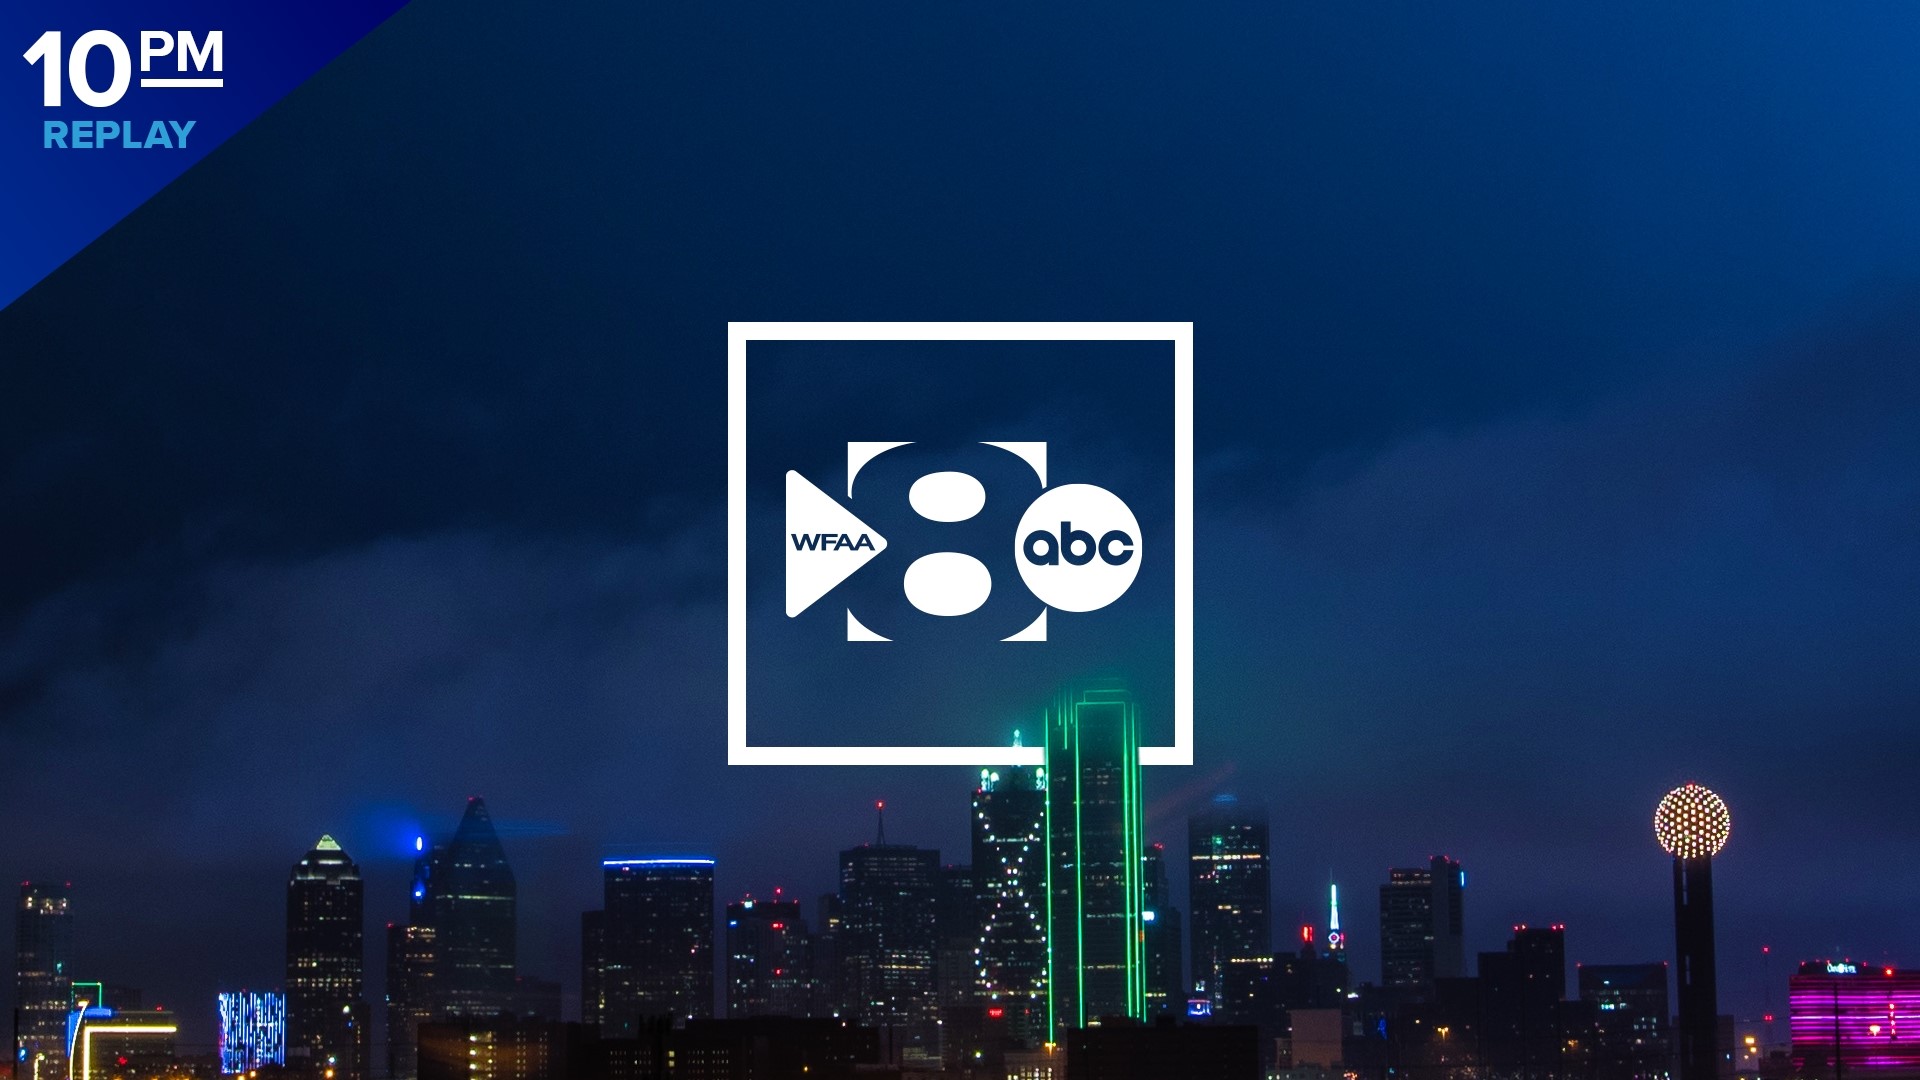 WFAA covers local, national and international news as well as North Texas weather updates, traveler forecasts and other areas of interest. Morgan Young anchors.
